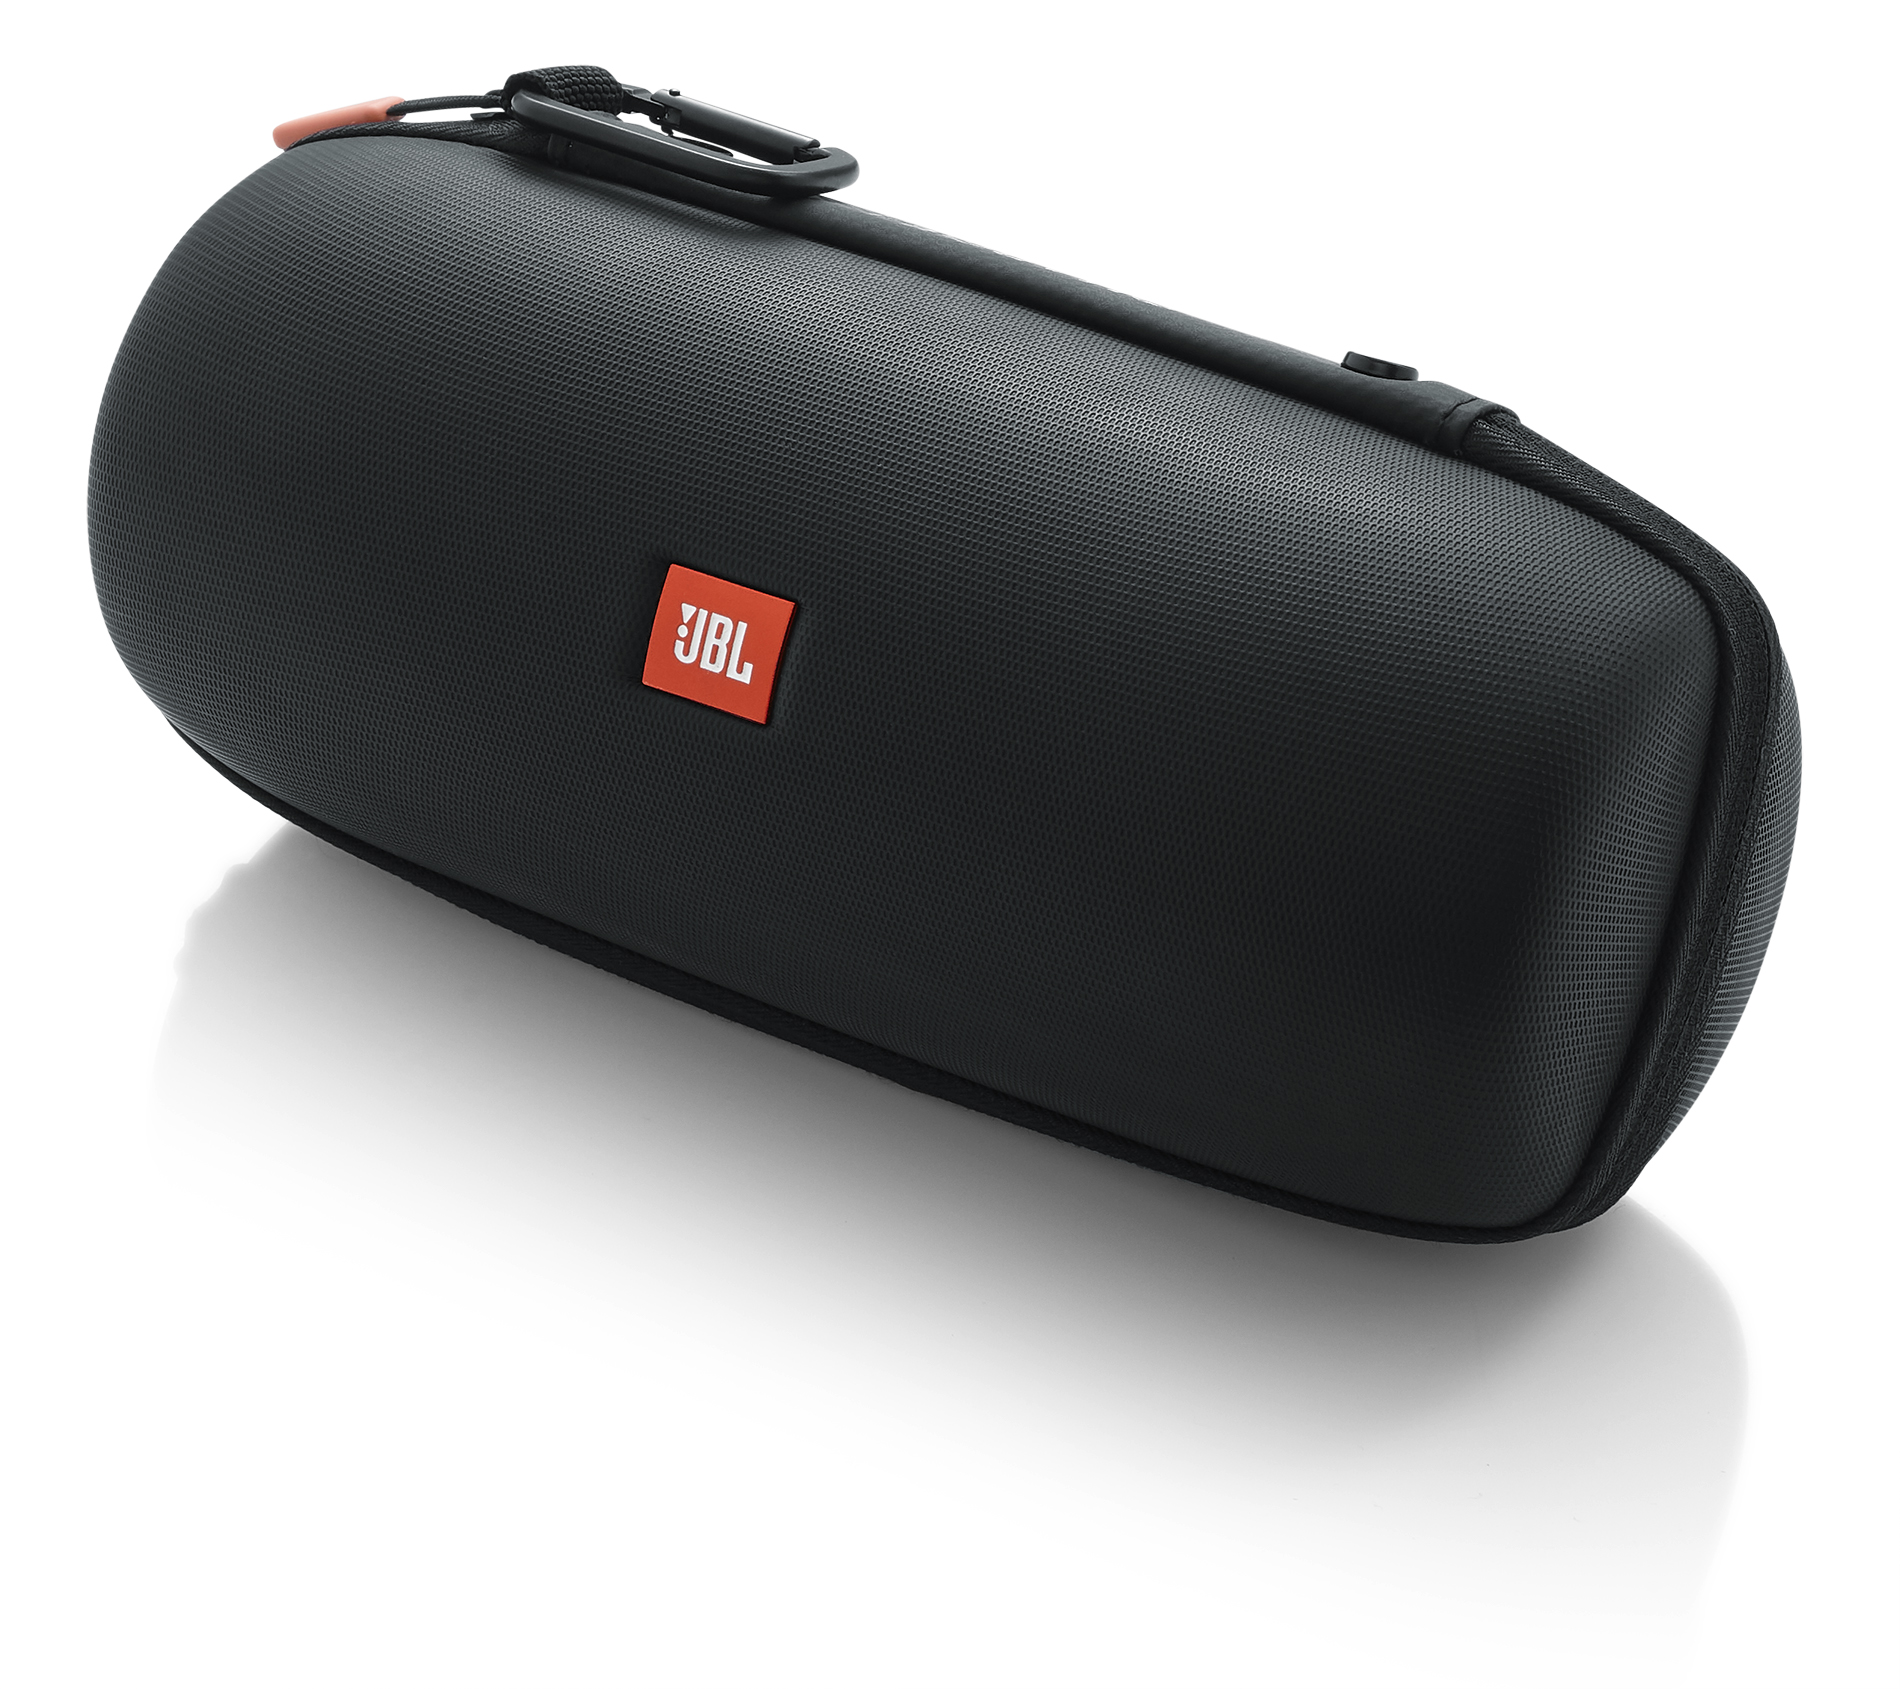 Featured Design with More Protection Portable Bluetooth Speaker Black Best Matching in Shape and Color getgear Silicone Cover Sleeve for JBL Charge 5 